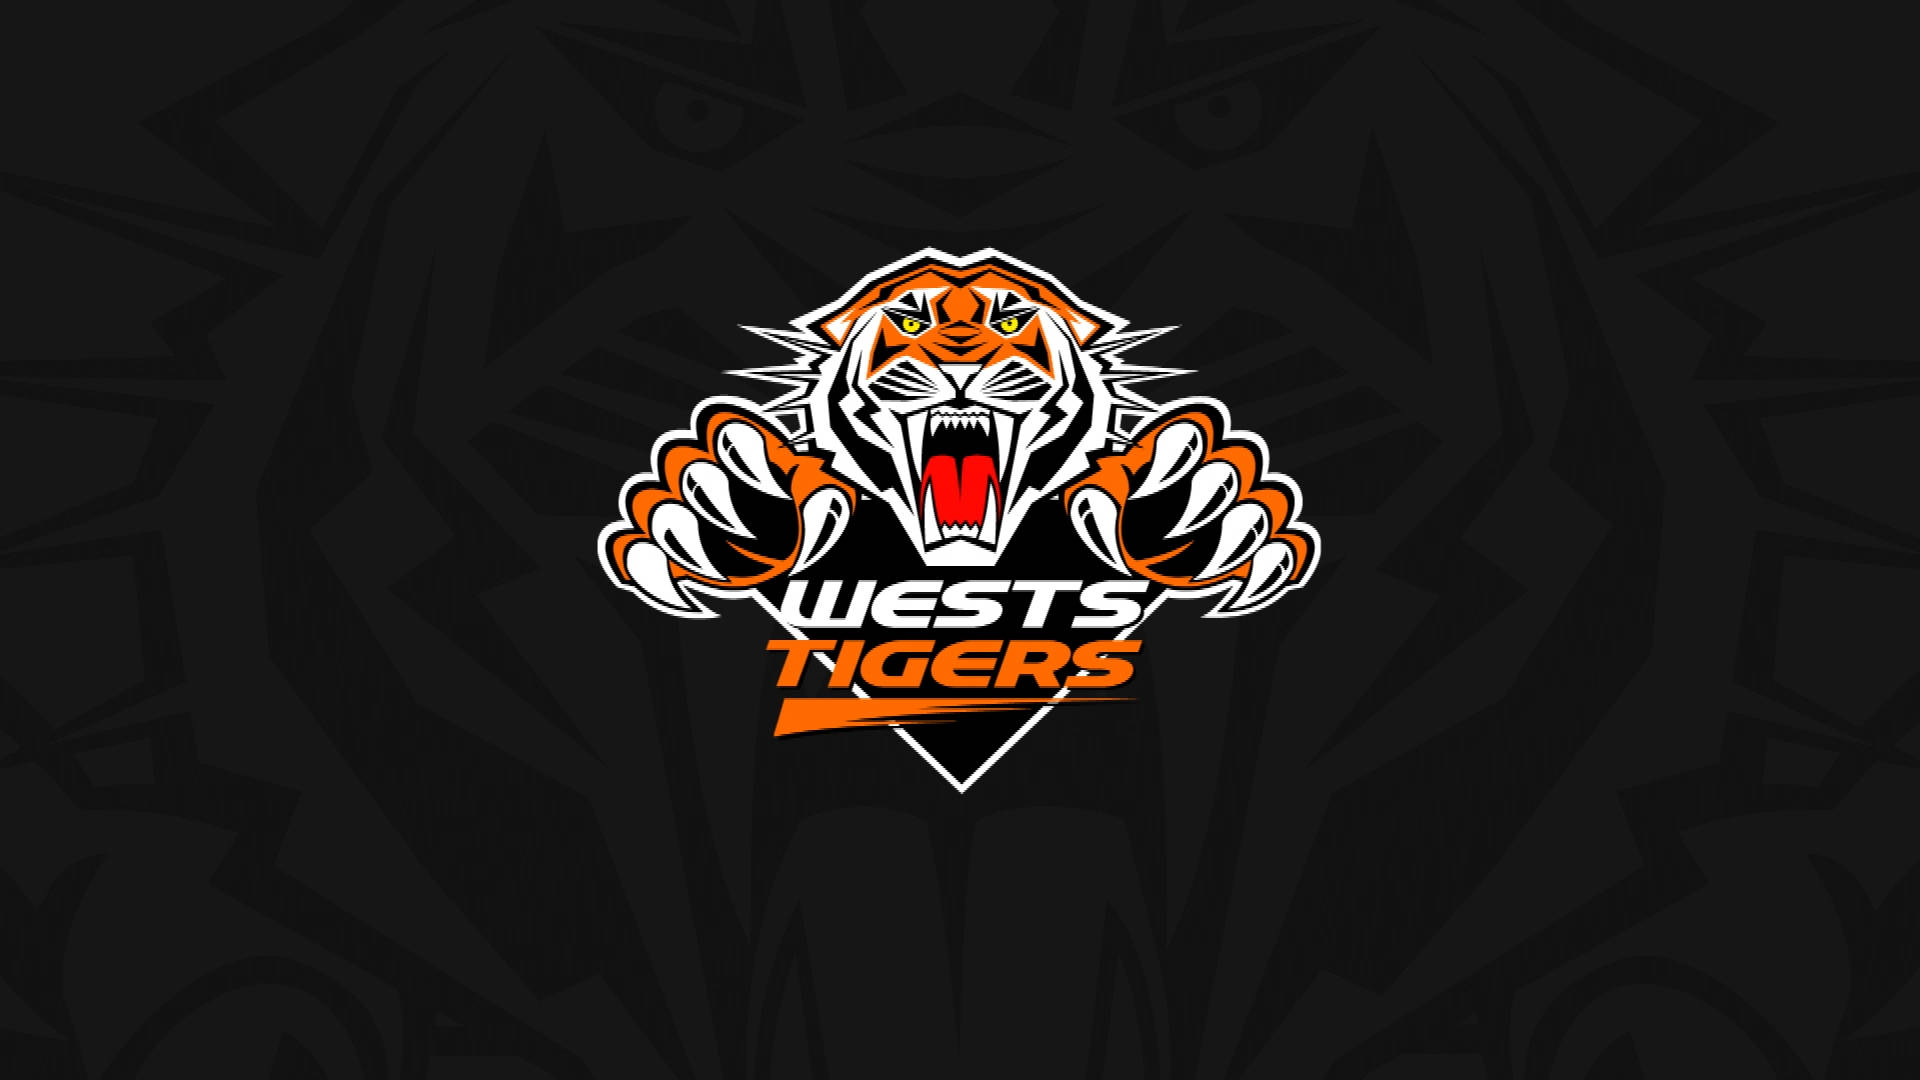 Striking Image of the NRL West Tigers Wallpaper